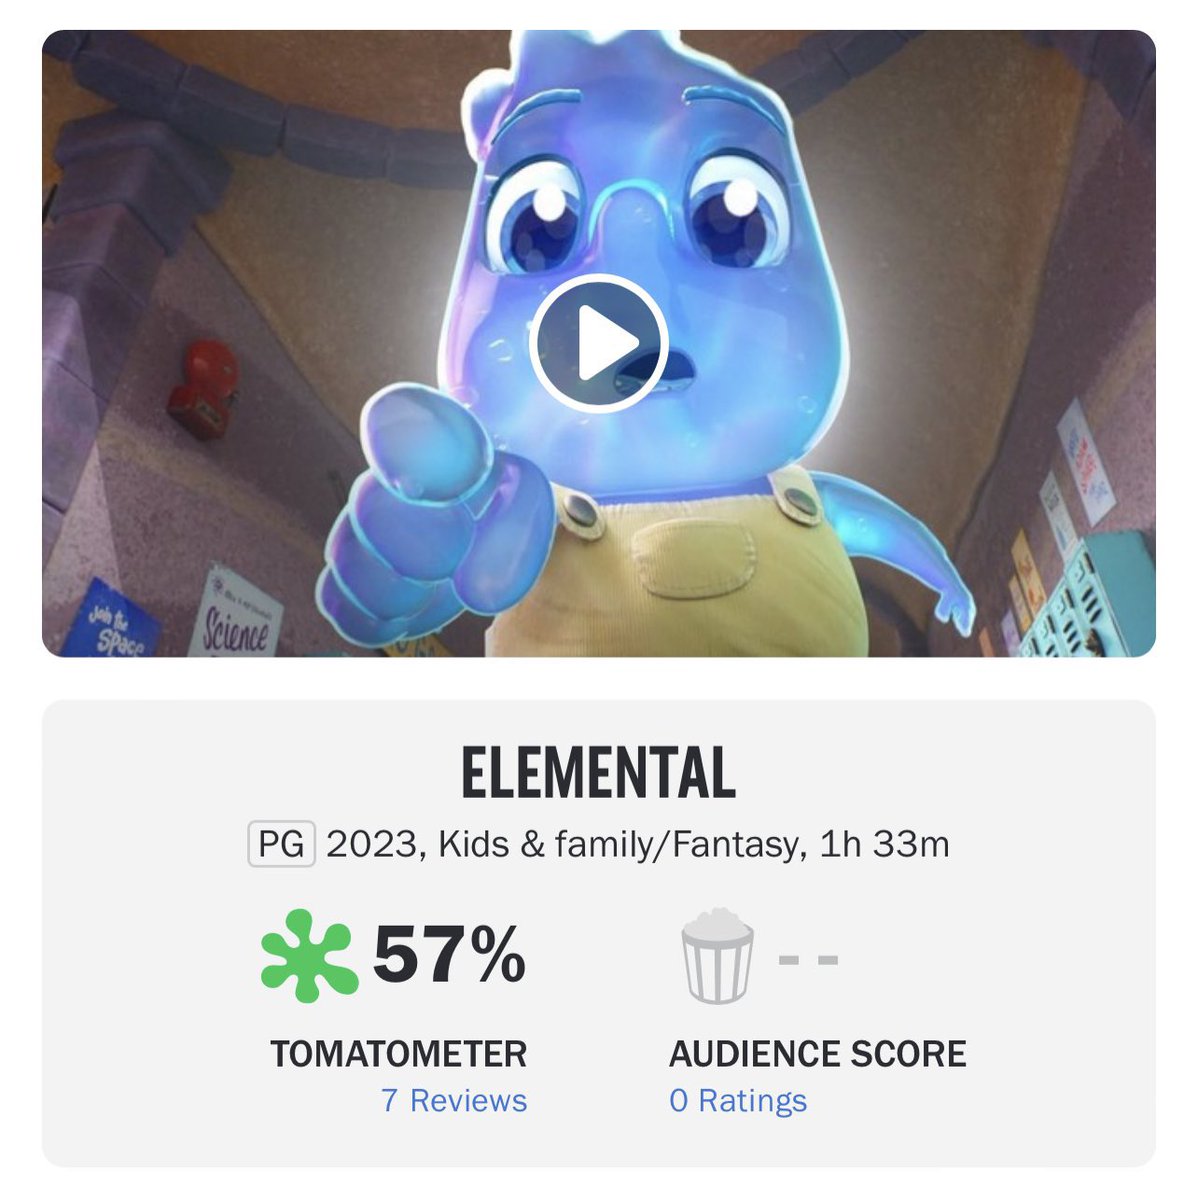 ‘ELEMENTAL’ opens with 57% on Rotten Tomatoes.